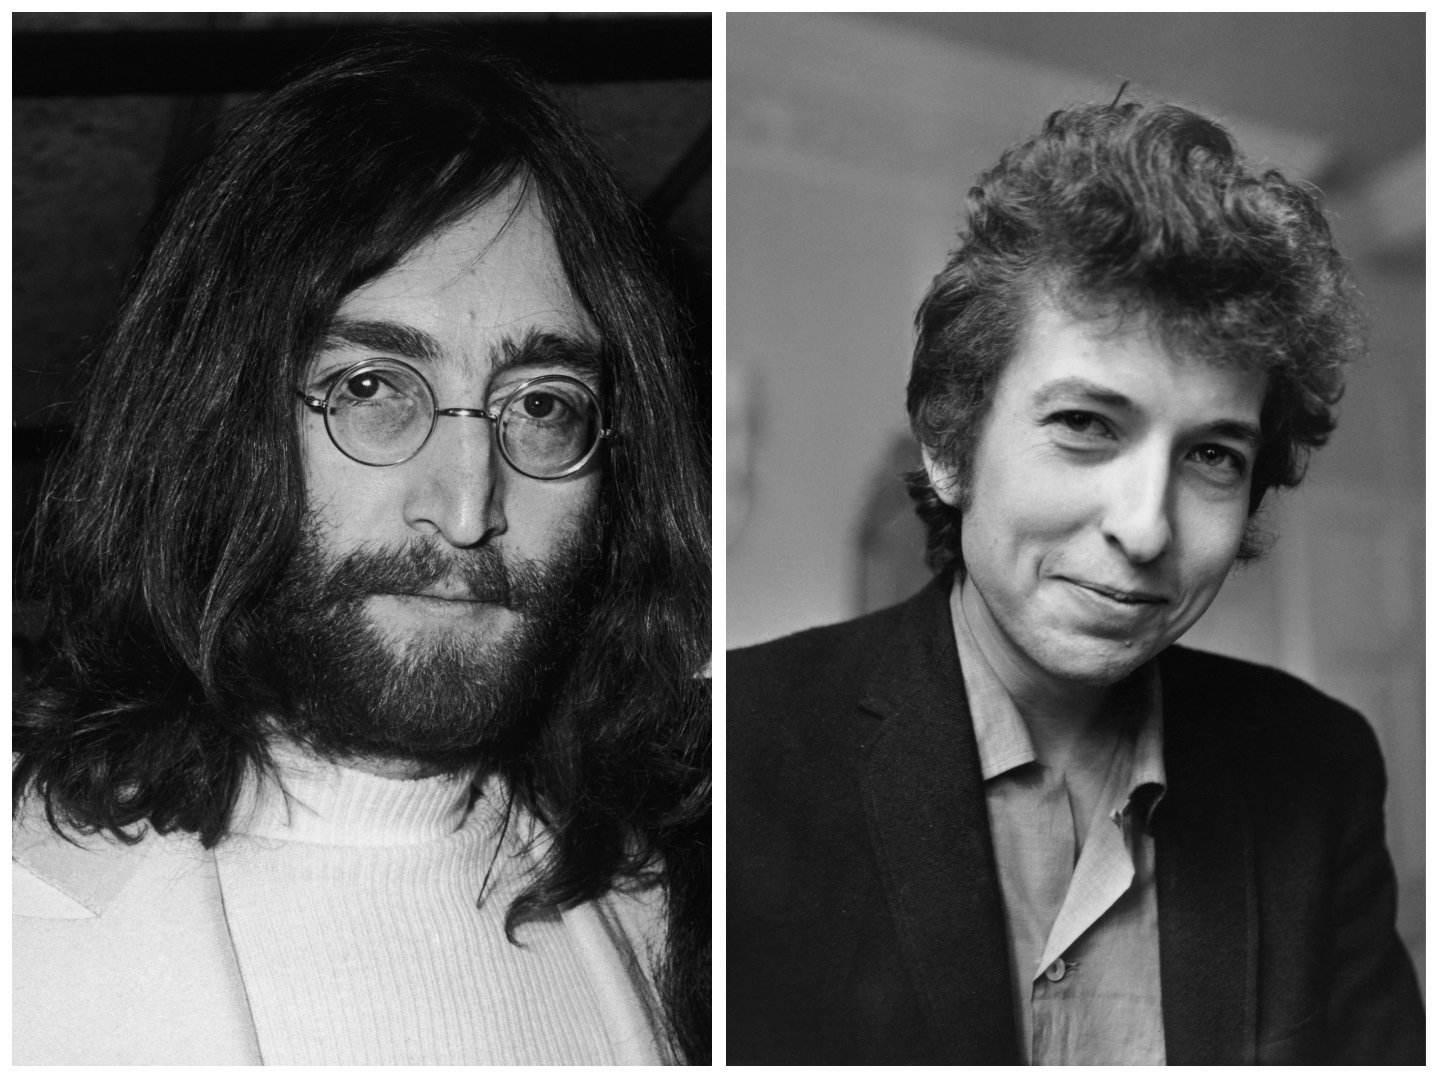 A black and white photo of John Lennon wearing glasses. Bob Dylan wears a suit jacket and smiles. 